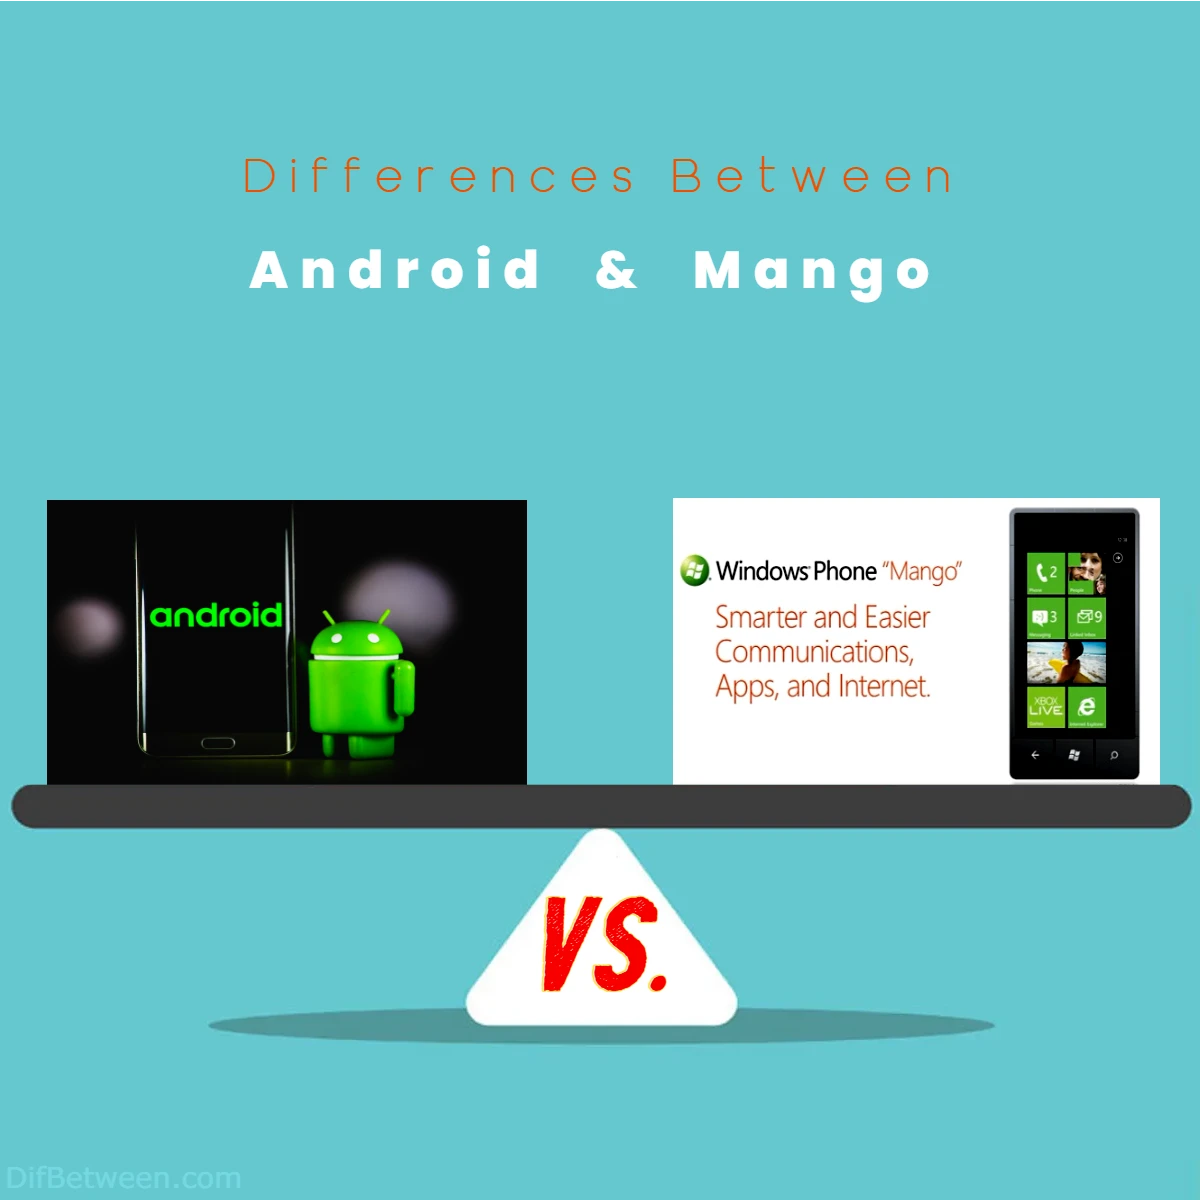 Differences Between Android vs Mango (Windows Phone 7 1)